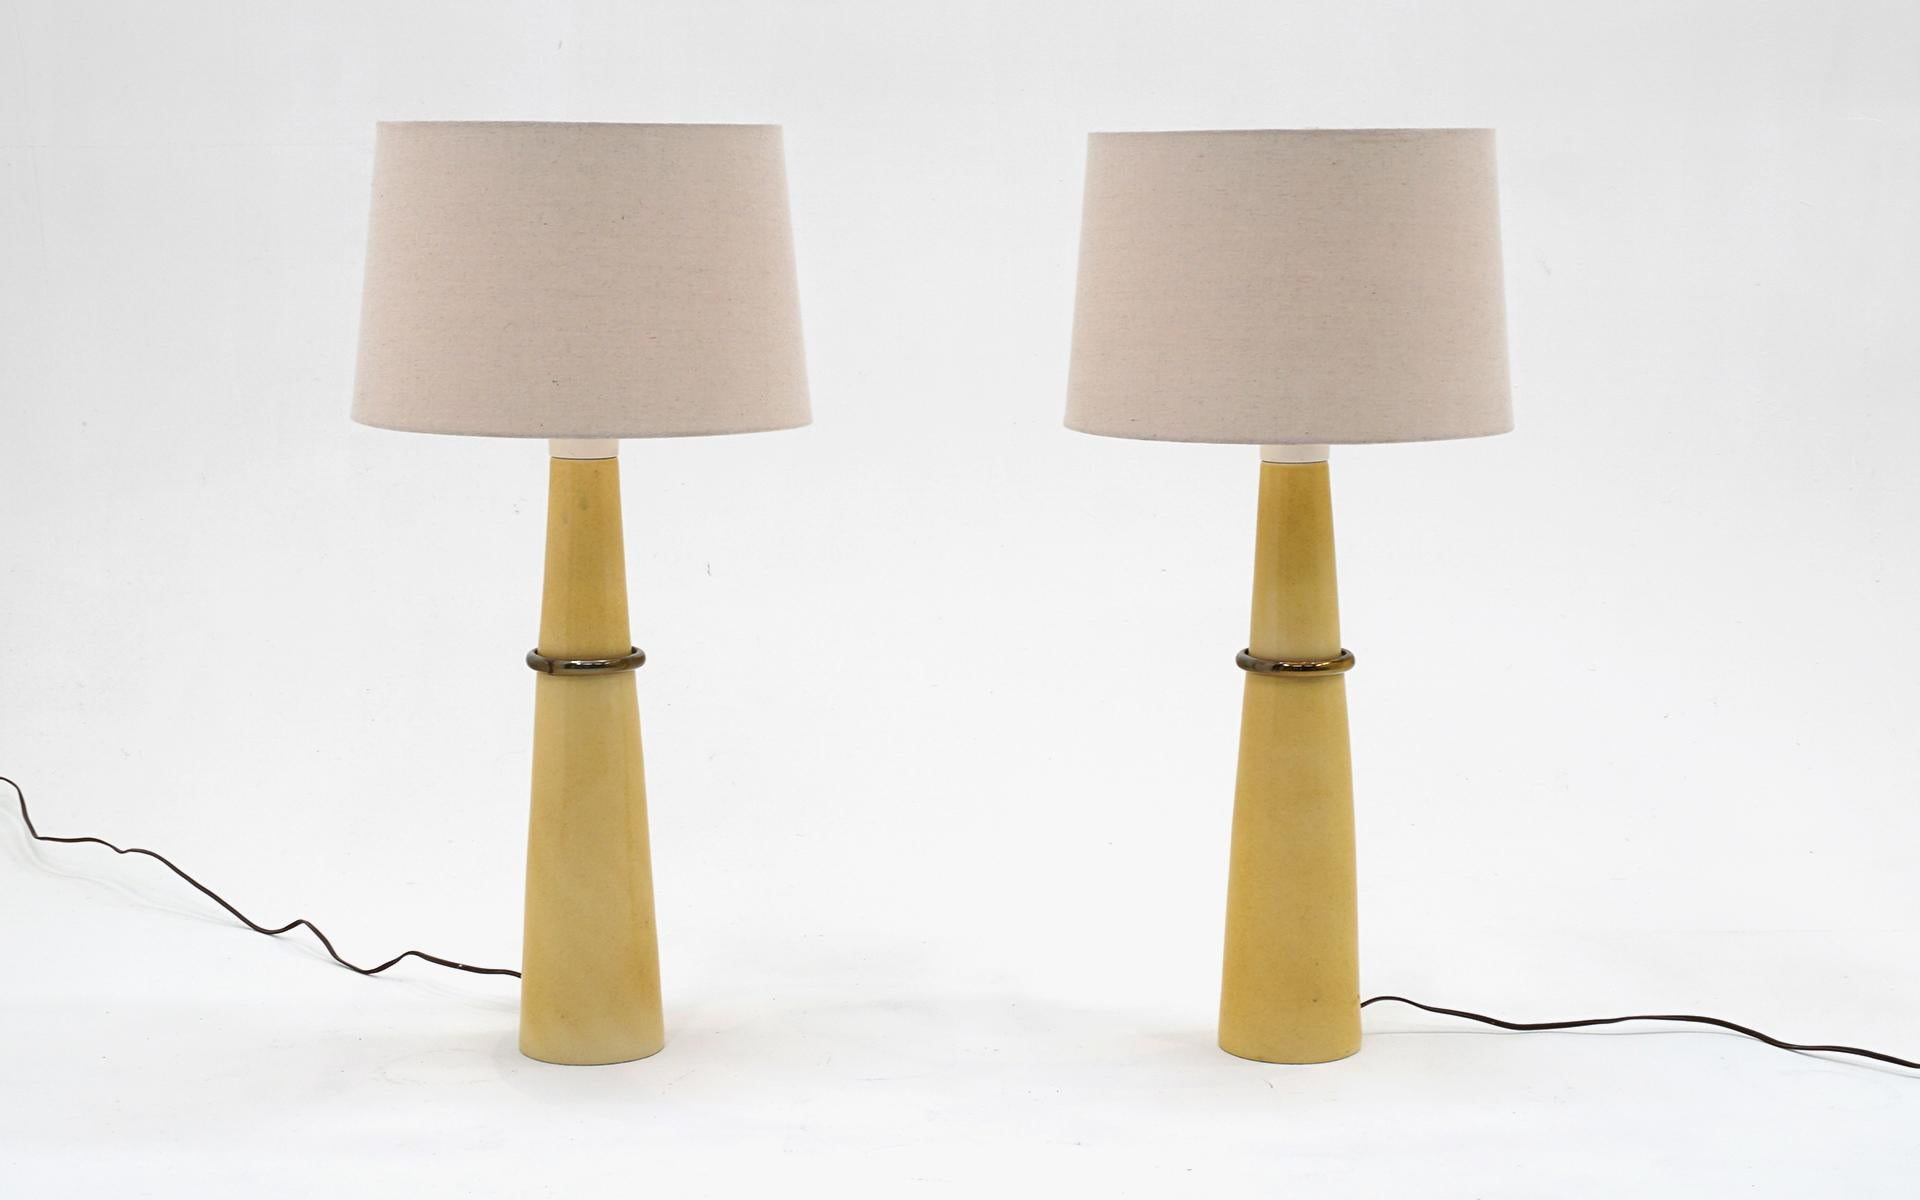 Pair of Russel / Russell Wright table lamps in mustard yellow glazed ceramic with brass ring.  Original round wooden switch.  Very good condition with no chips or significant scratches.  The white painted portion has very small areas of loss on